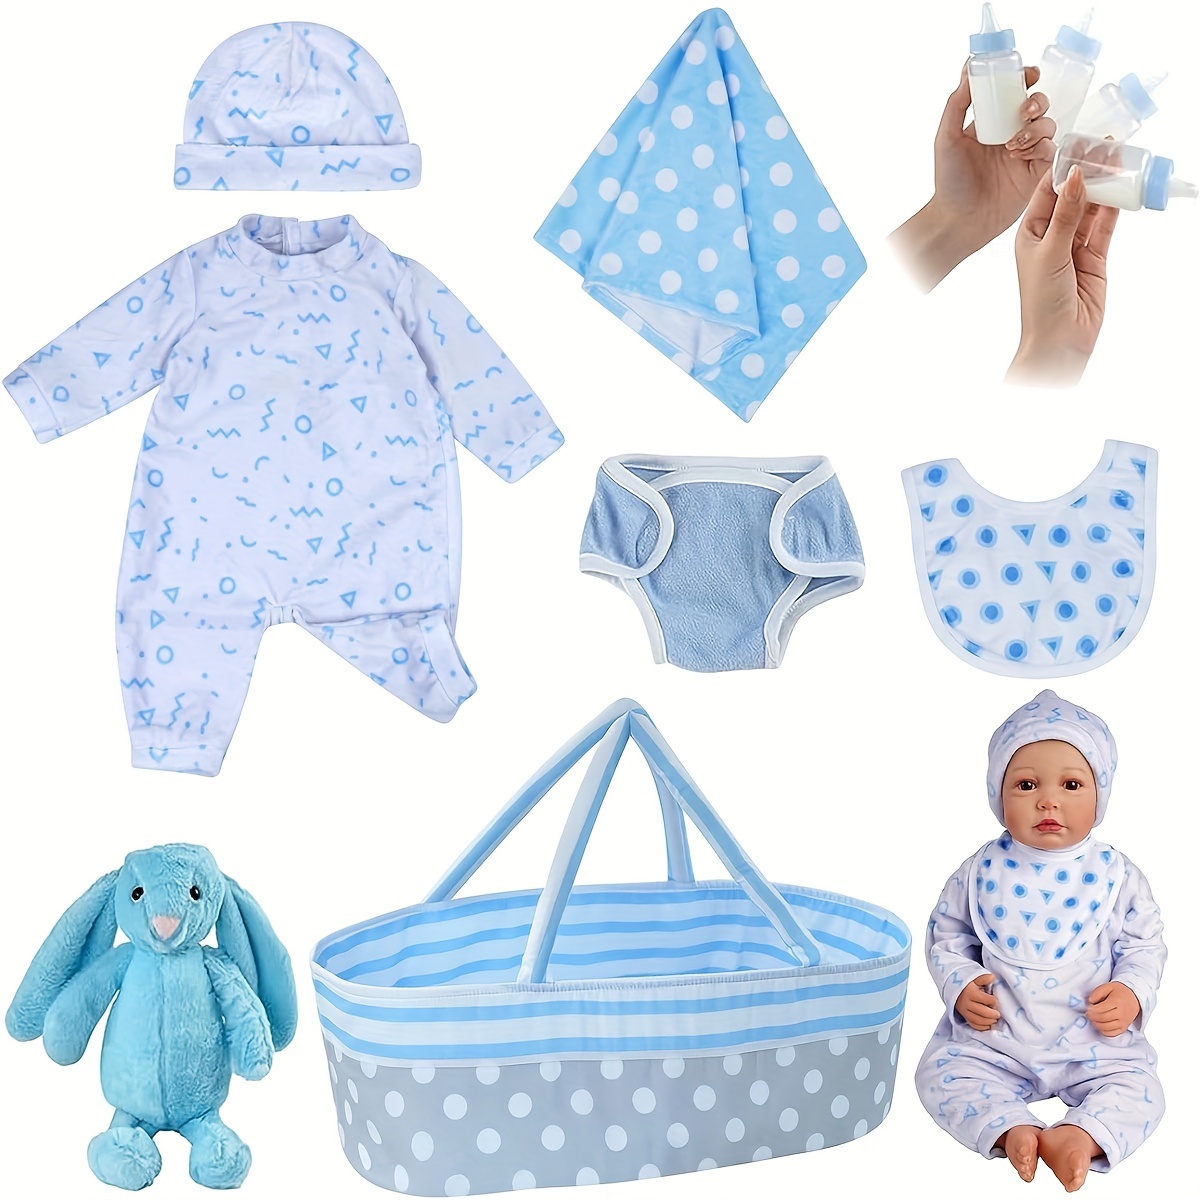 

Babeside 8 Pcs Reborn Baby Doll Accessories With Bassinet For 17-22 Inch Baby Doll, Baby Doll Clothes Outfit Accessories Fit Reborn Doll Newborn Boy